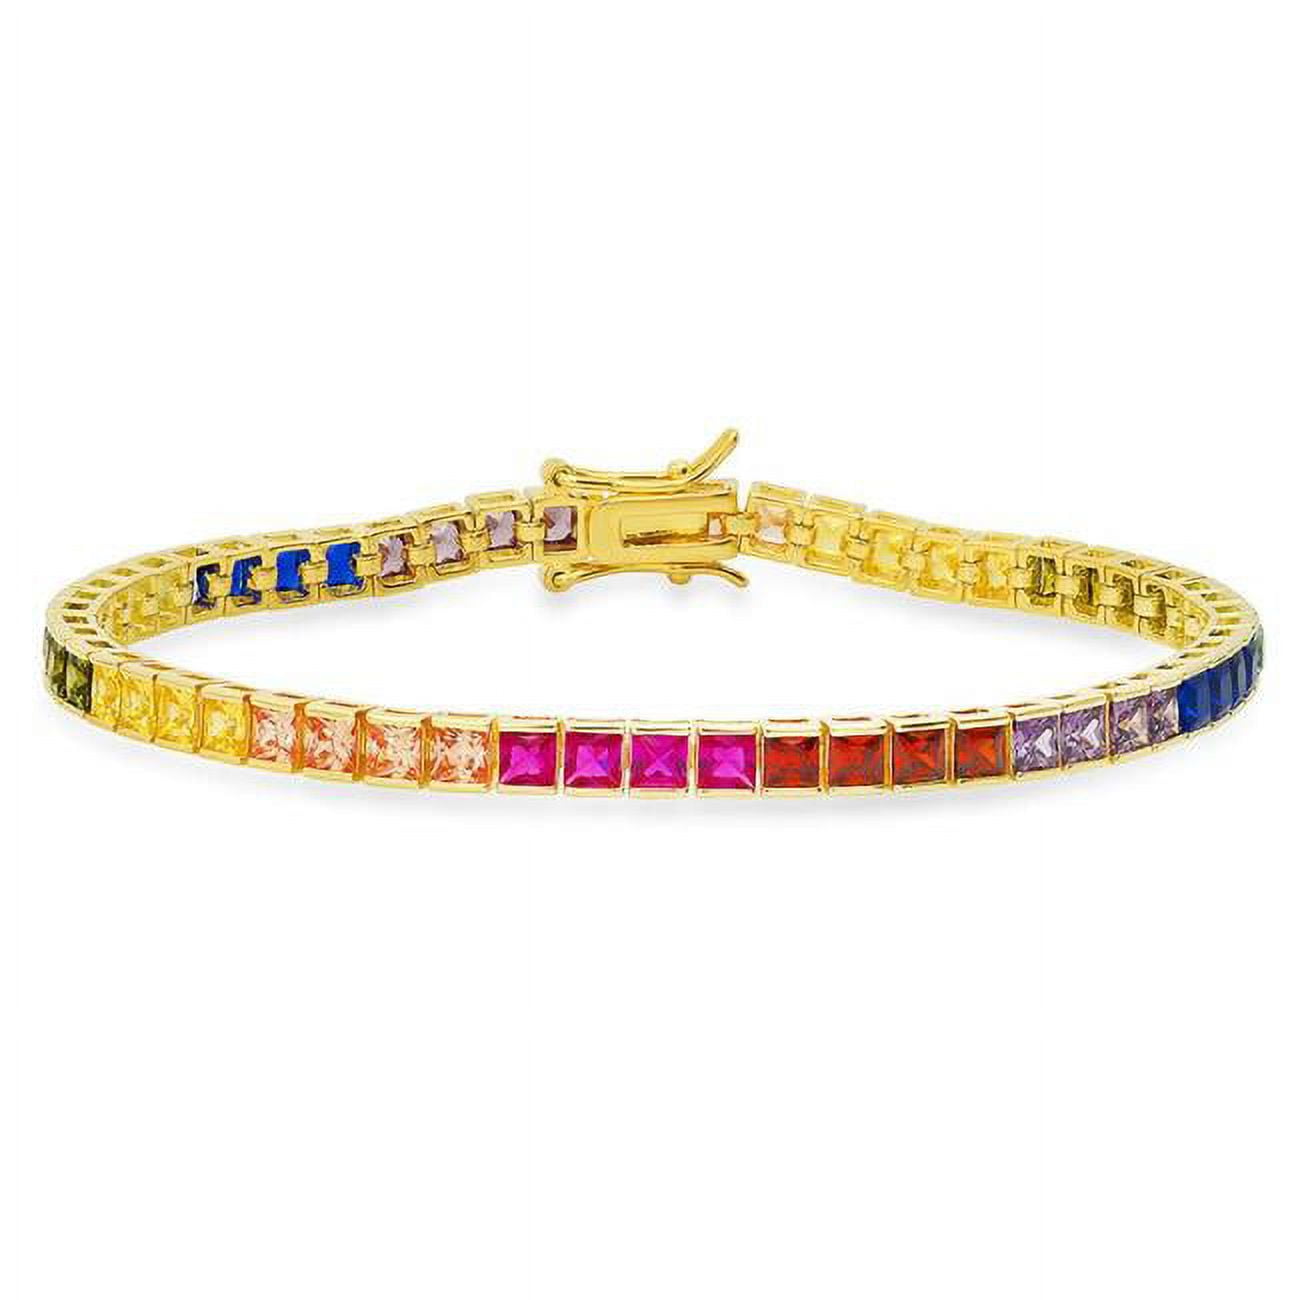 Picture of 212 Main 02-009Y-DSB 7.25 in. 14K Gold Over Silver Multi Color Princess-Cut Cubic Zirconia Tennis Bracelet